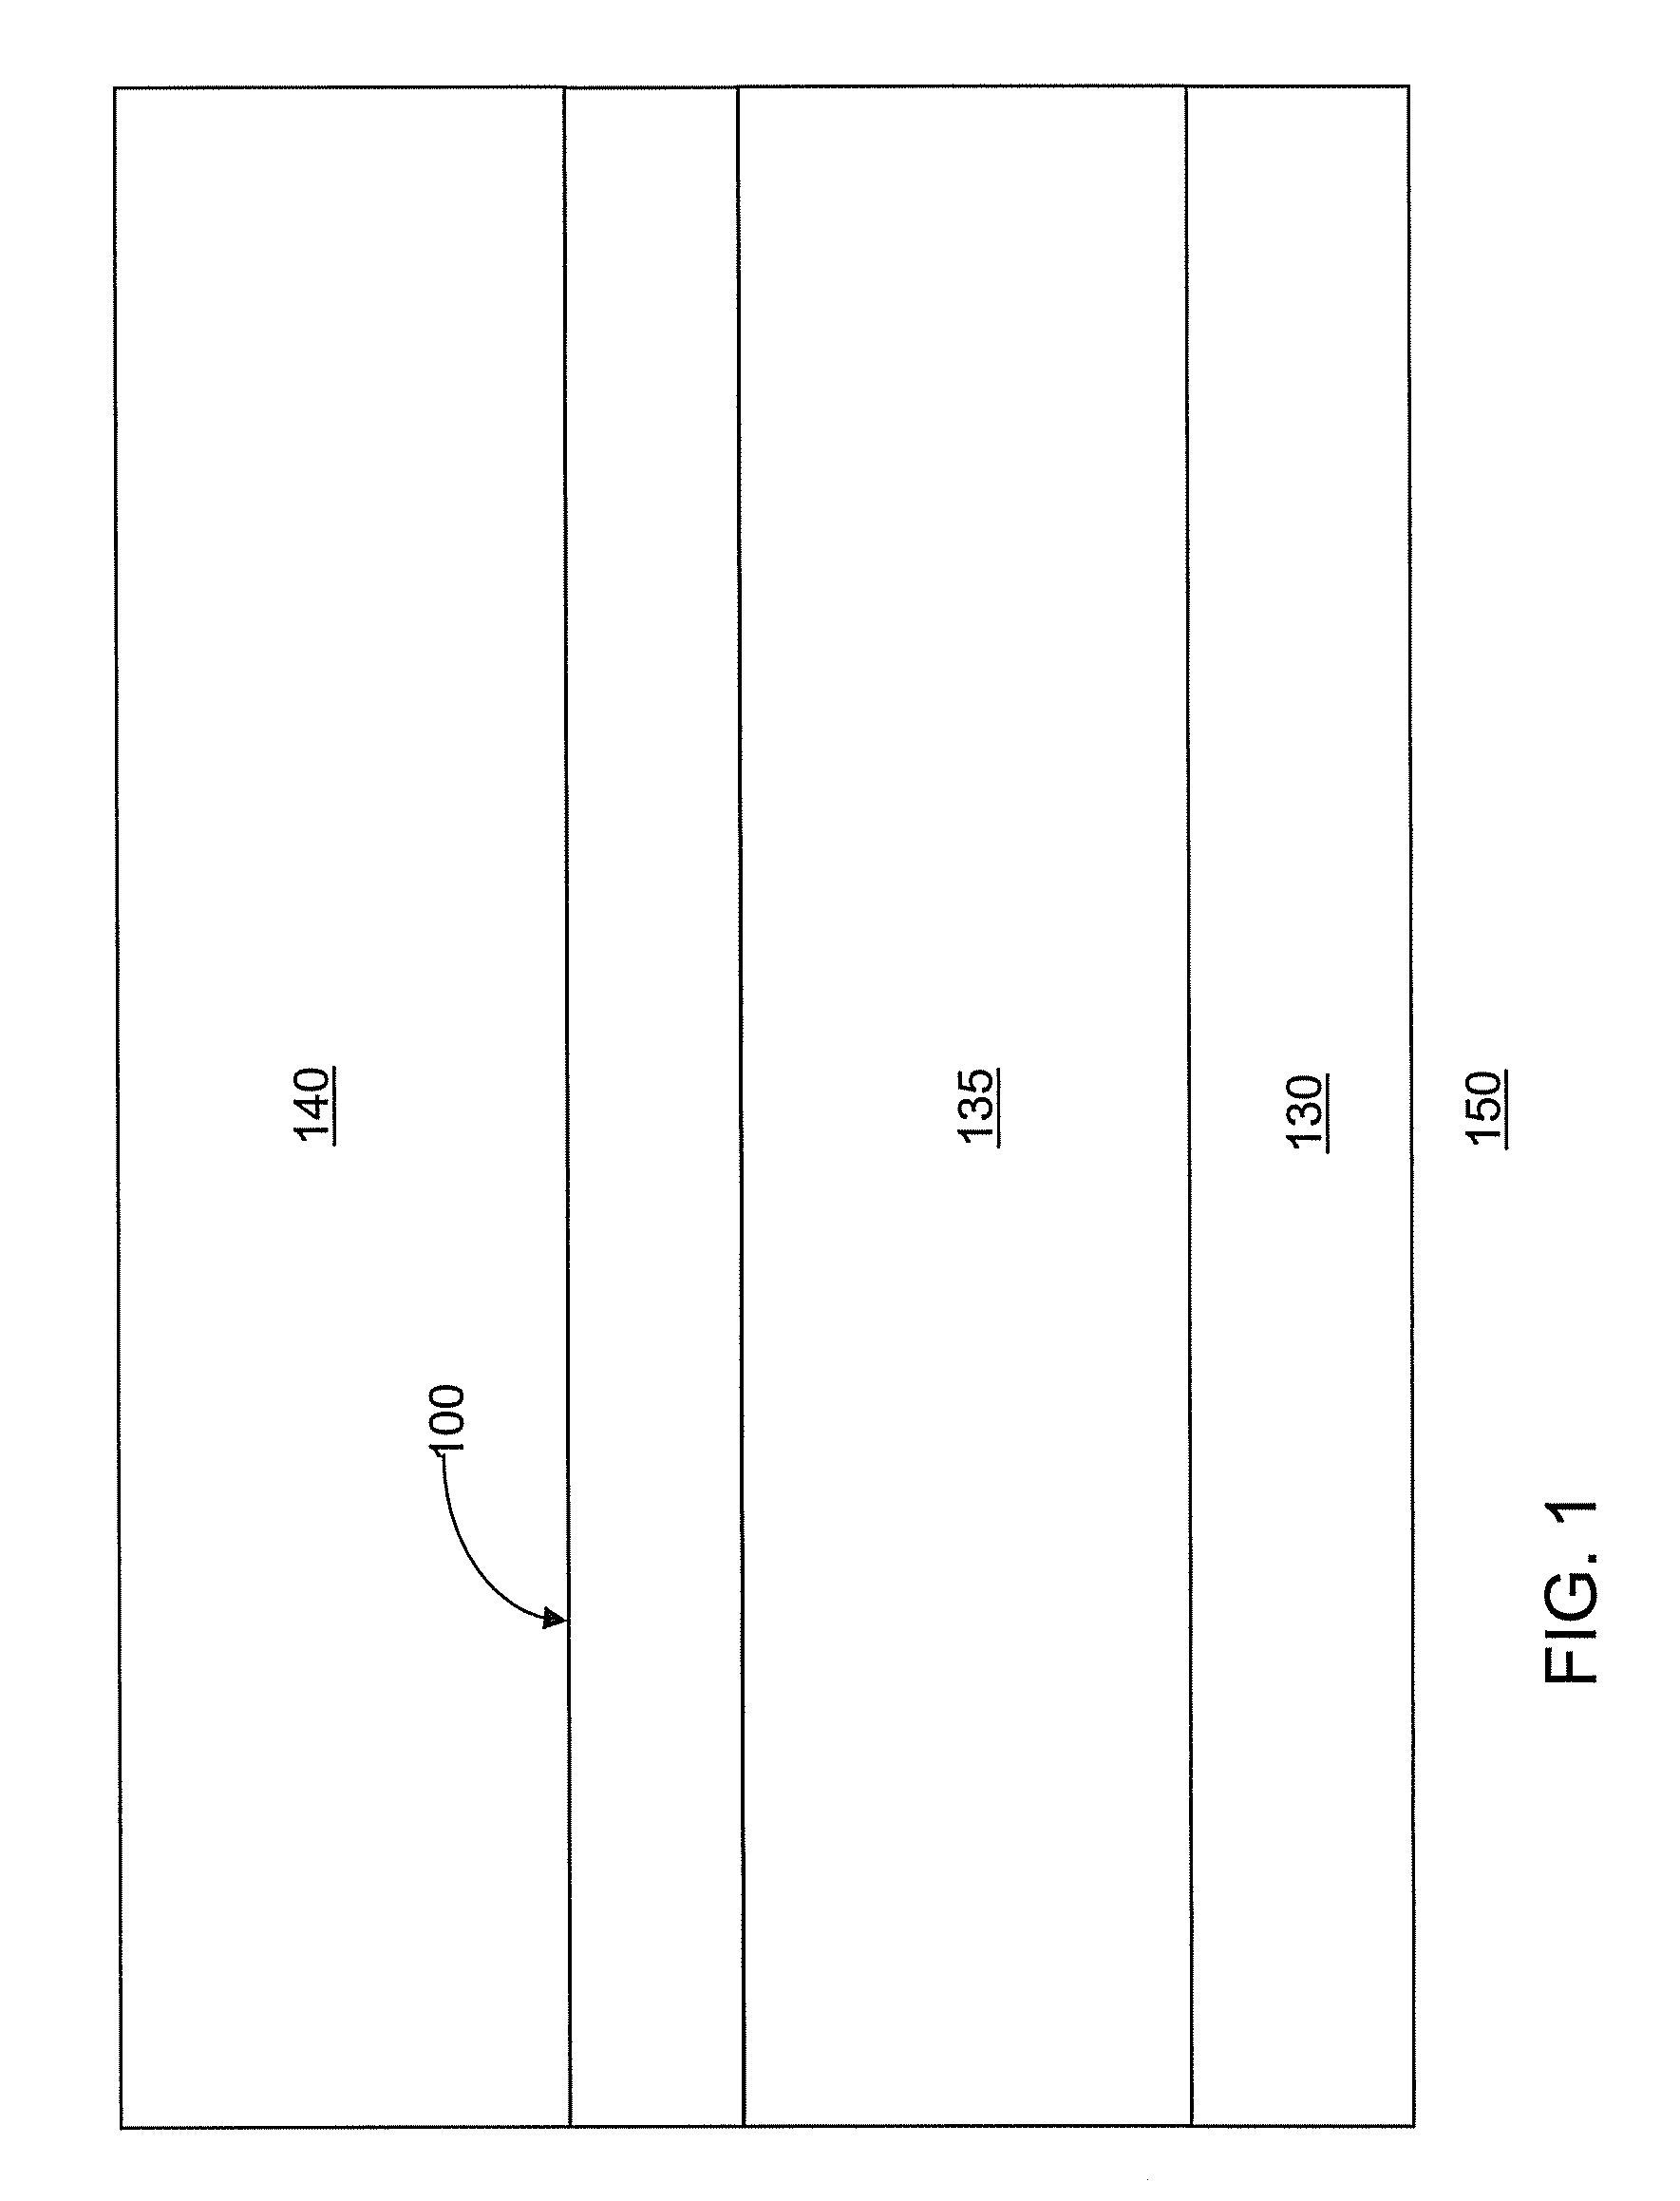 Reinforcement for asphaltic paving, method of paving, and process for making a grid with the coating for asphaltic paving